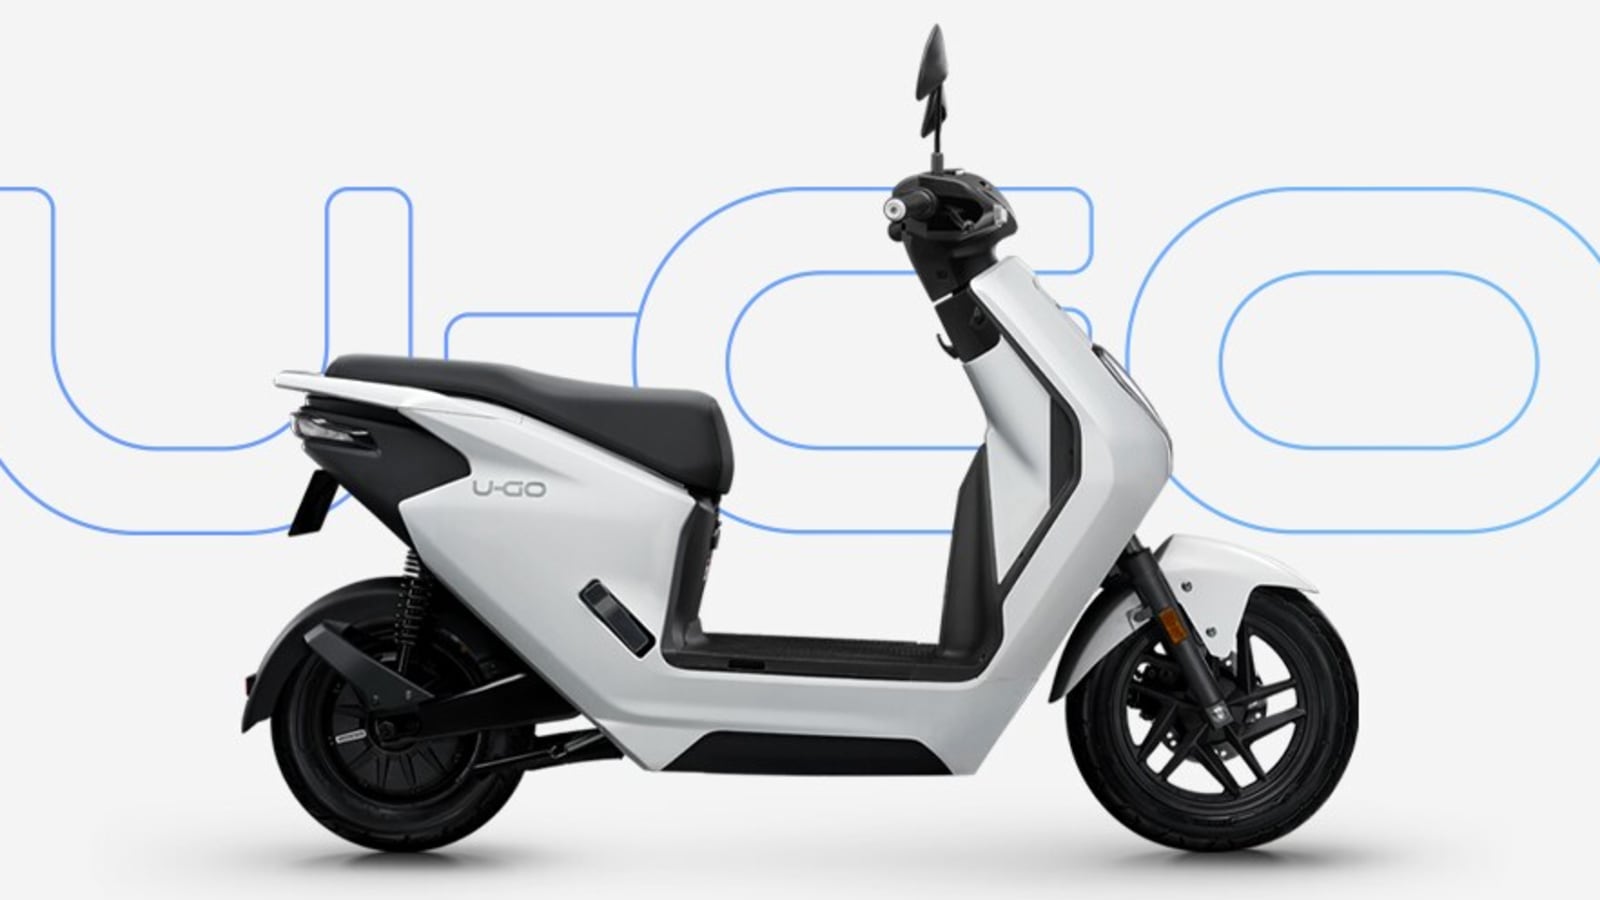 Honda launches affordable new electric scooter U-GO